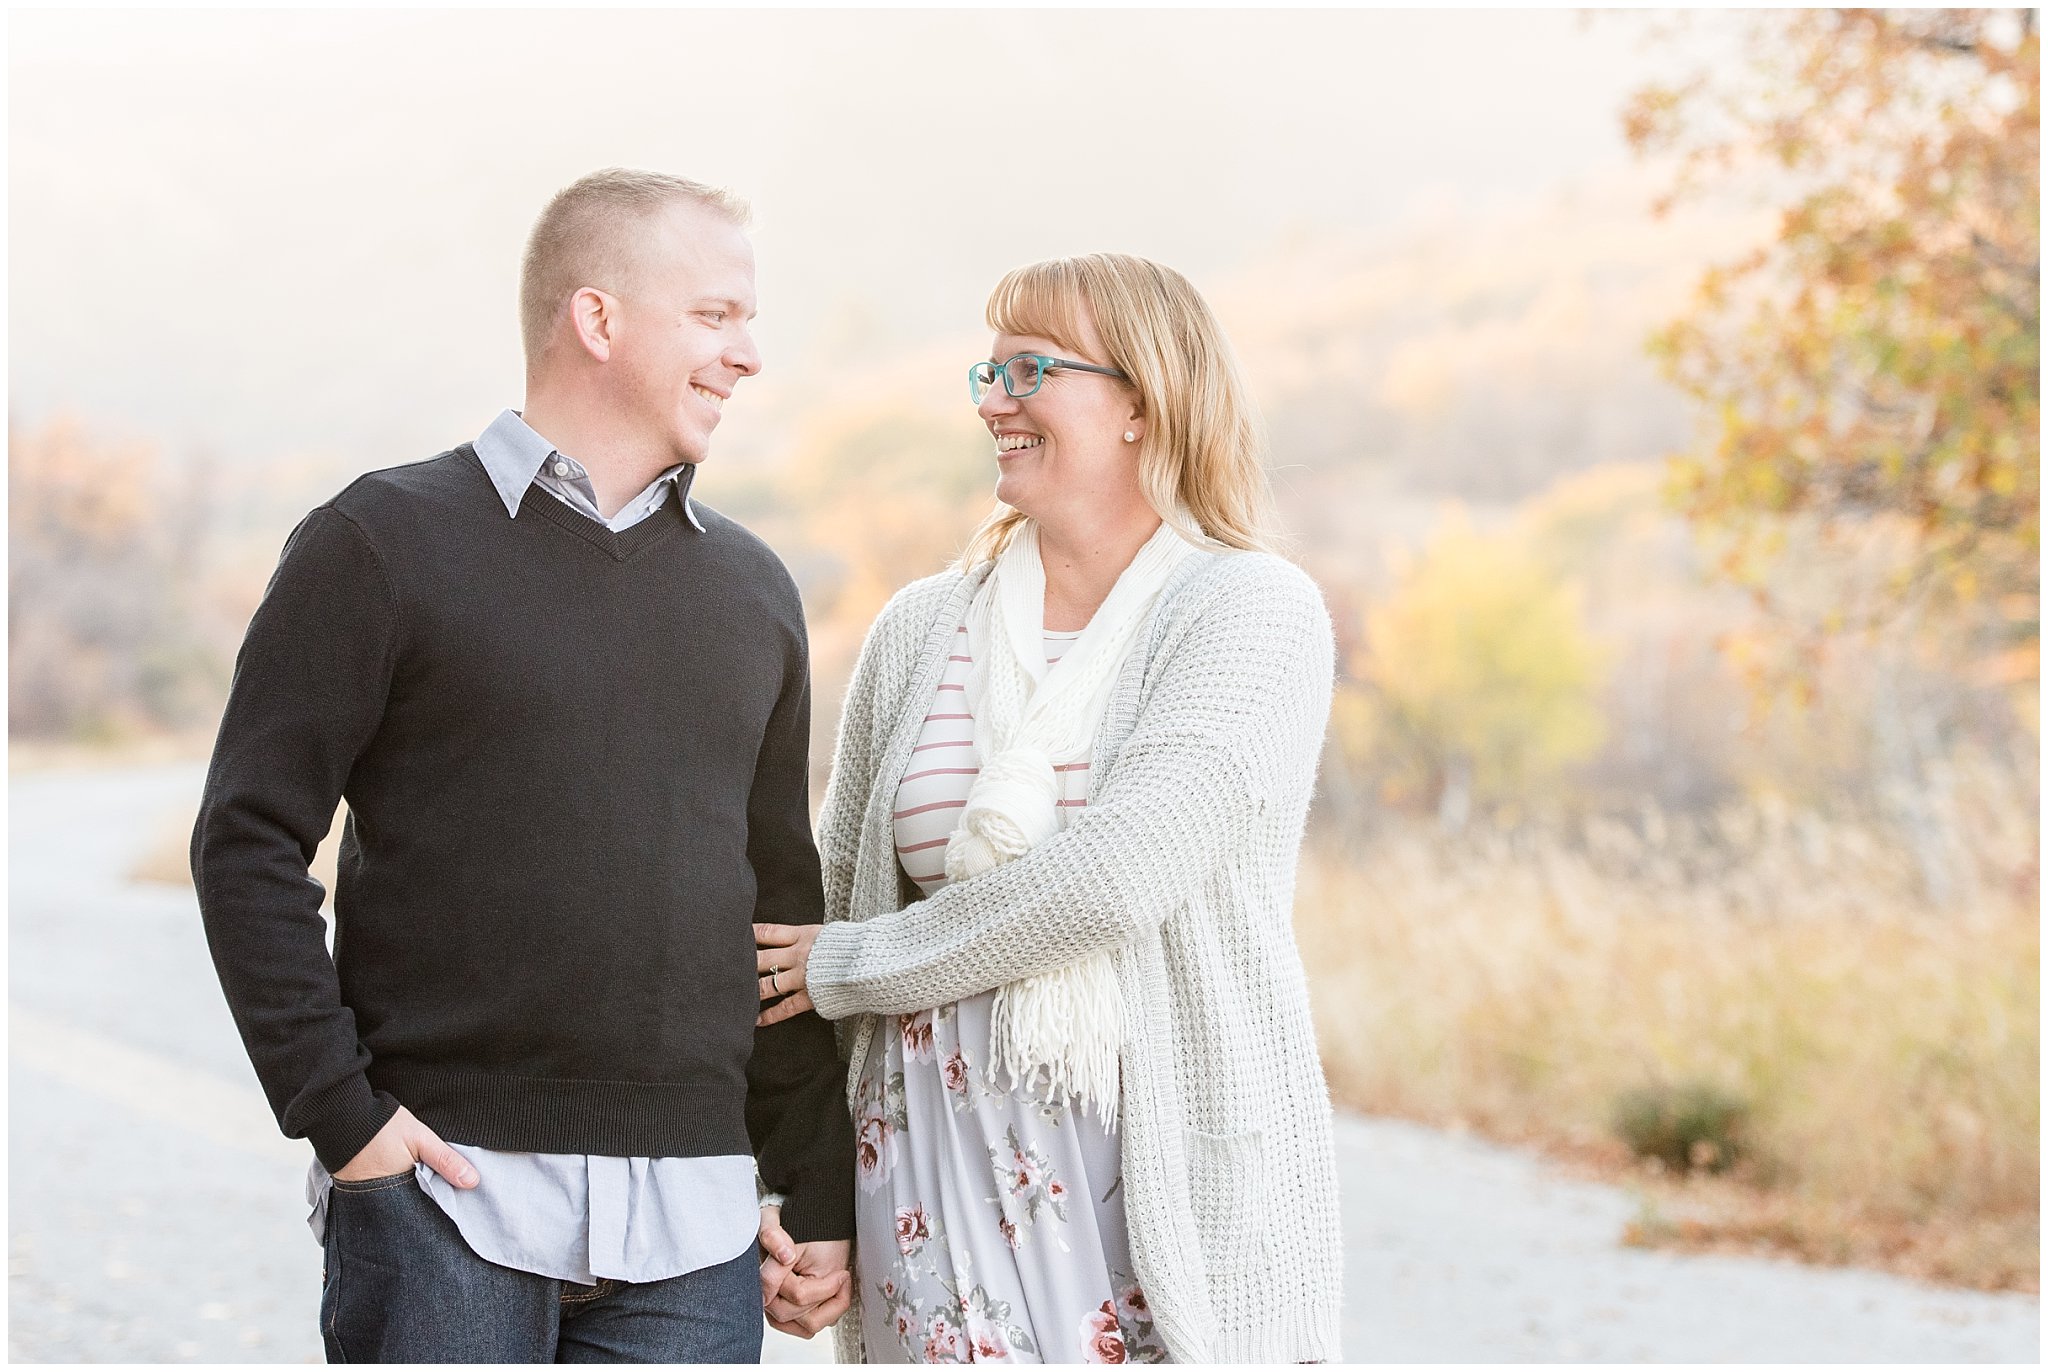 Couple walking in the fall leaves | Fall Family Pictures in the Mountains | Snowbasin, Utah | Jessie and Dallin Photography